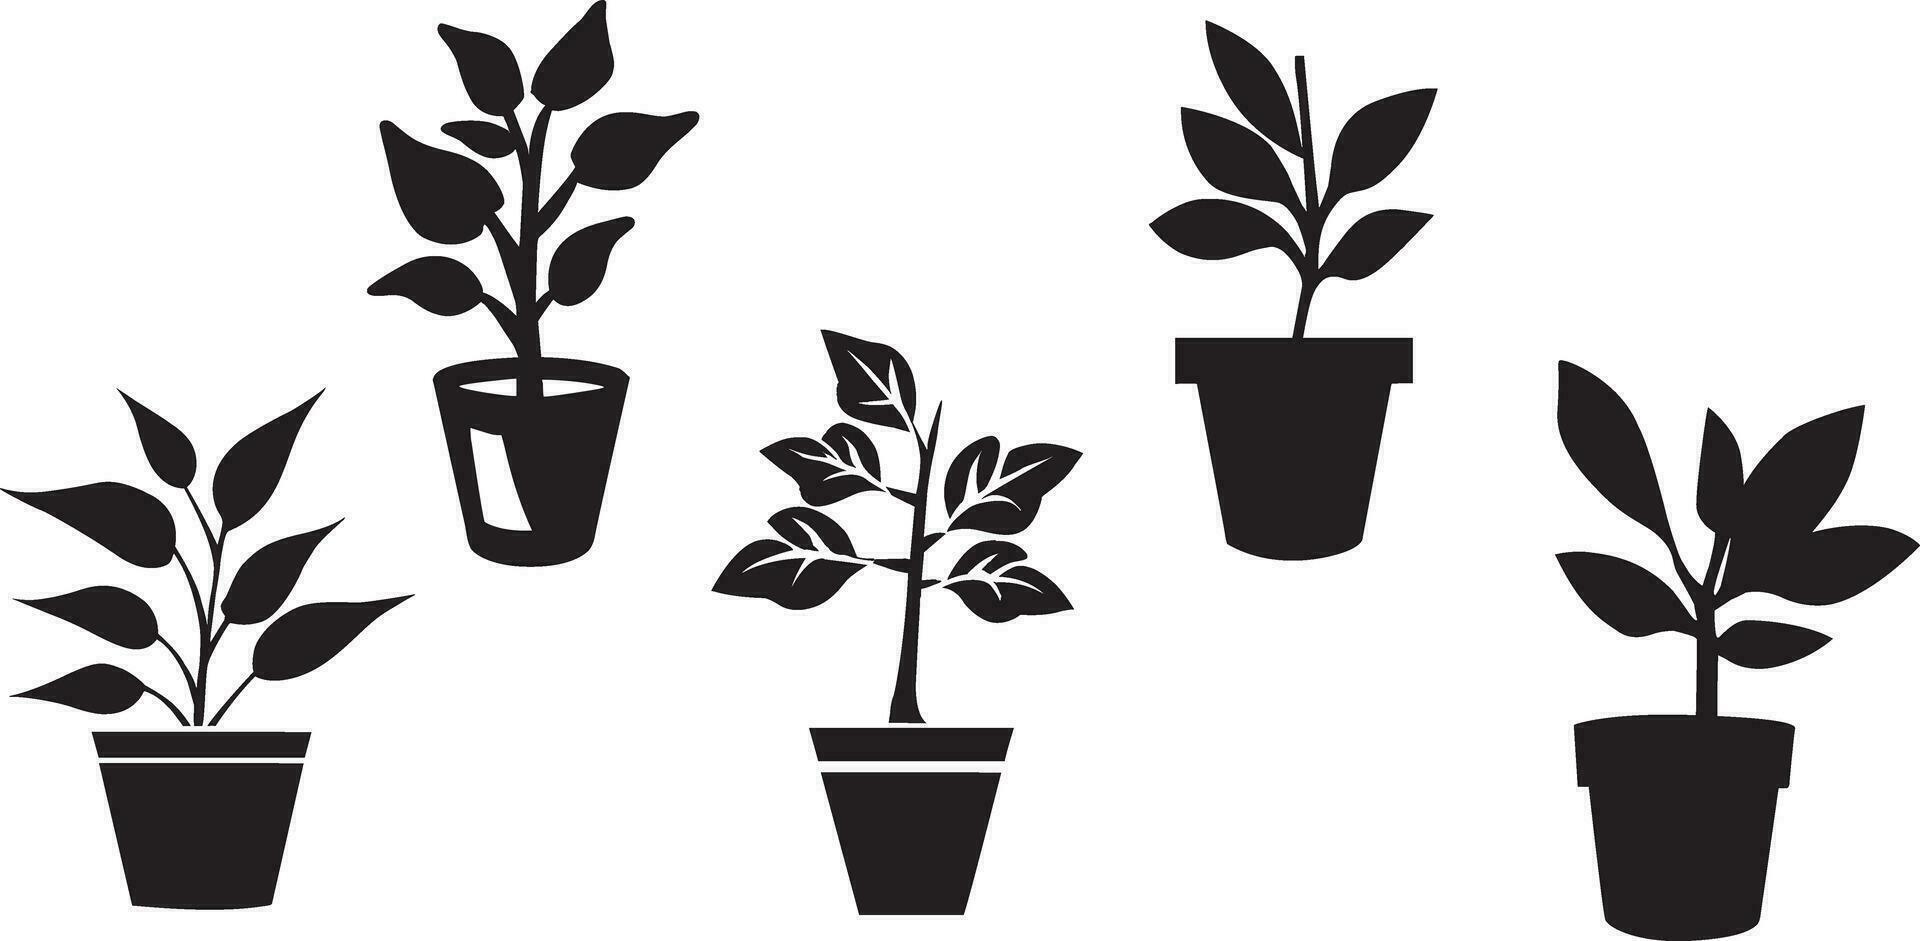 Black and white potted plant icons set. Set of potted plant silhouettes. Plants in pots. Potted plant vectors